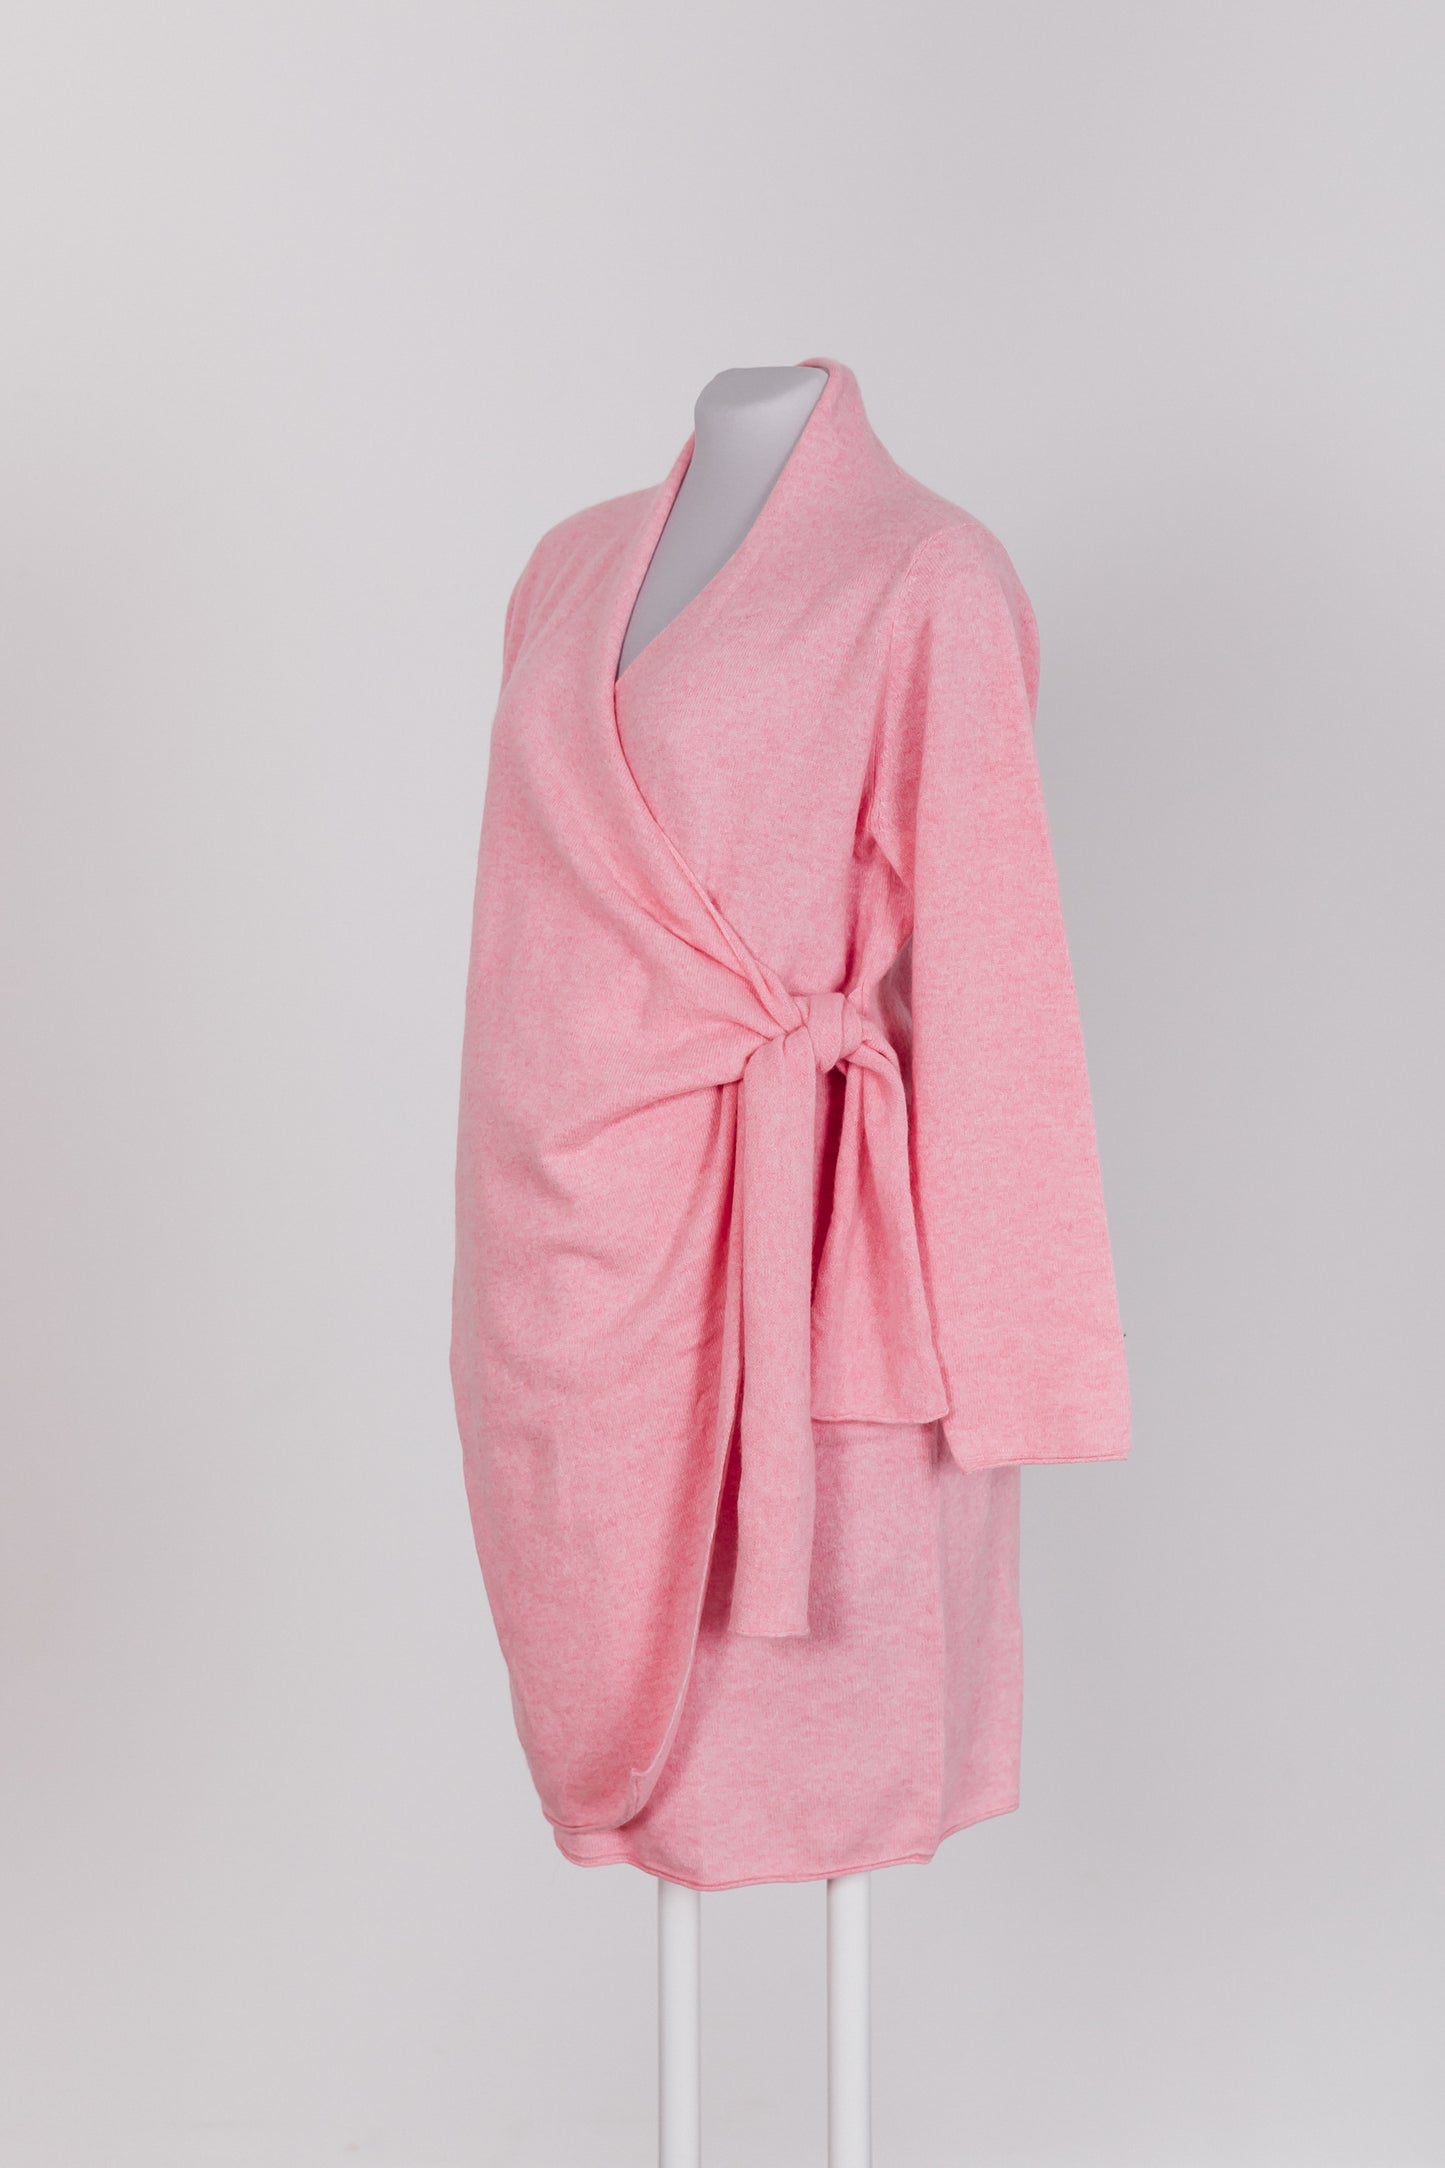 Cou Cou Maternity - Kokoon aus 100% Cashmere in Bubble Gum Pink